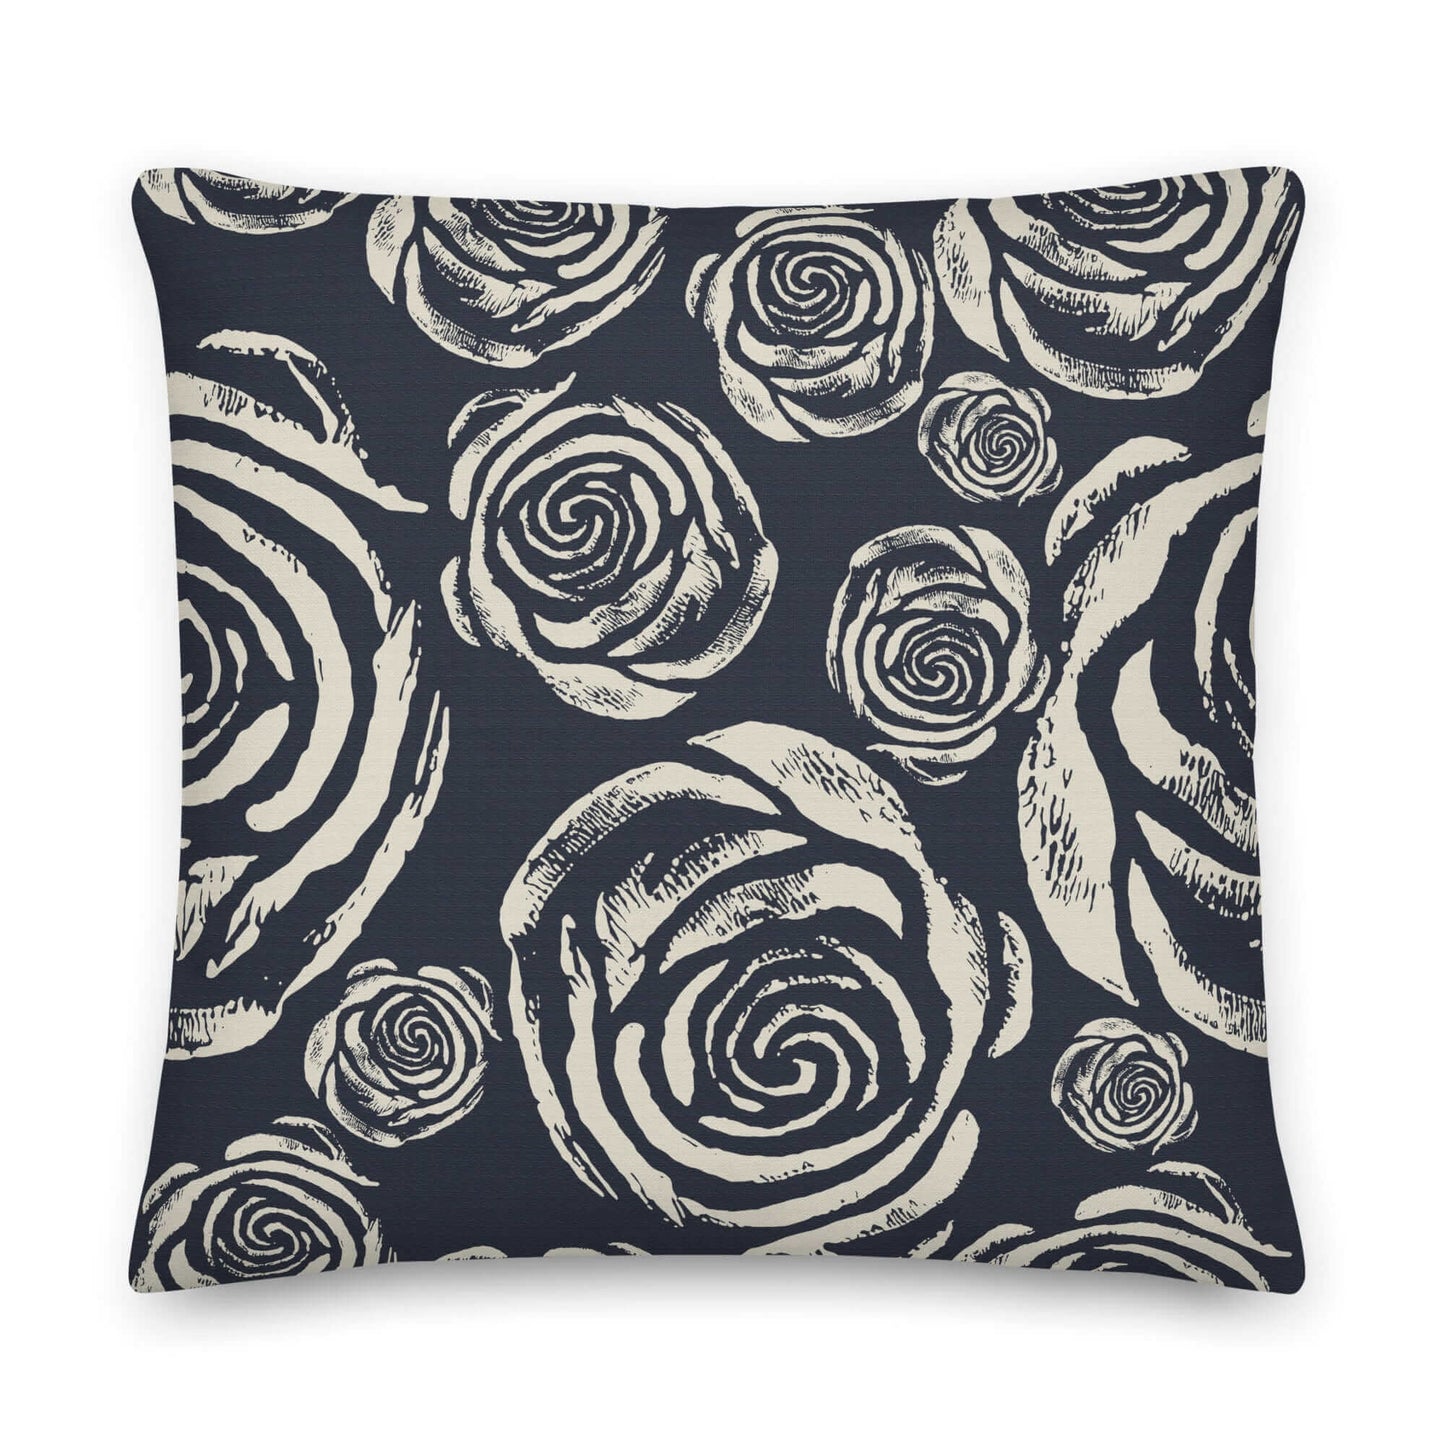 Rustic Rosa Pillow, Blueberry